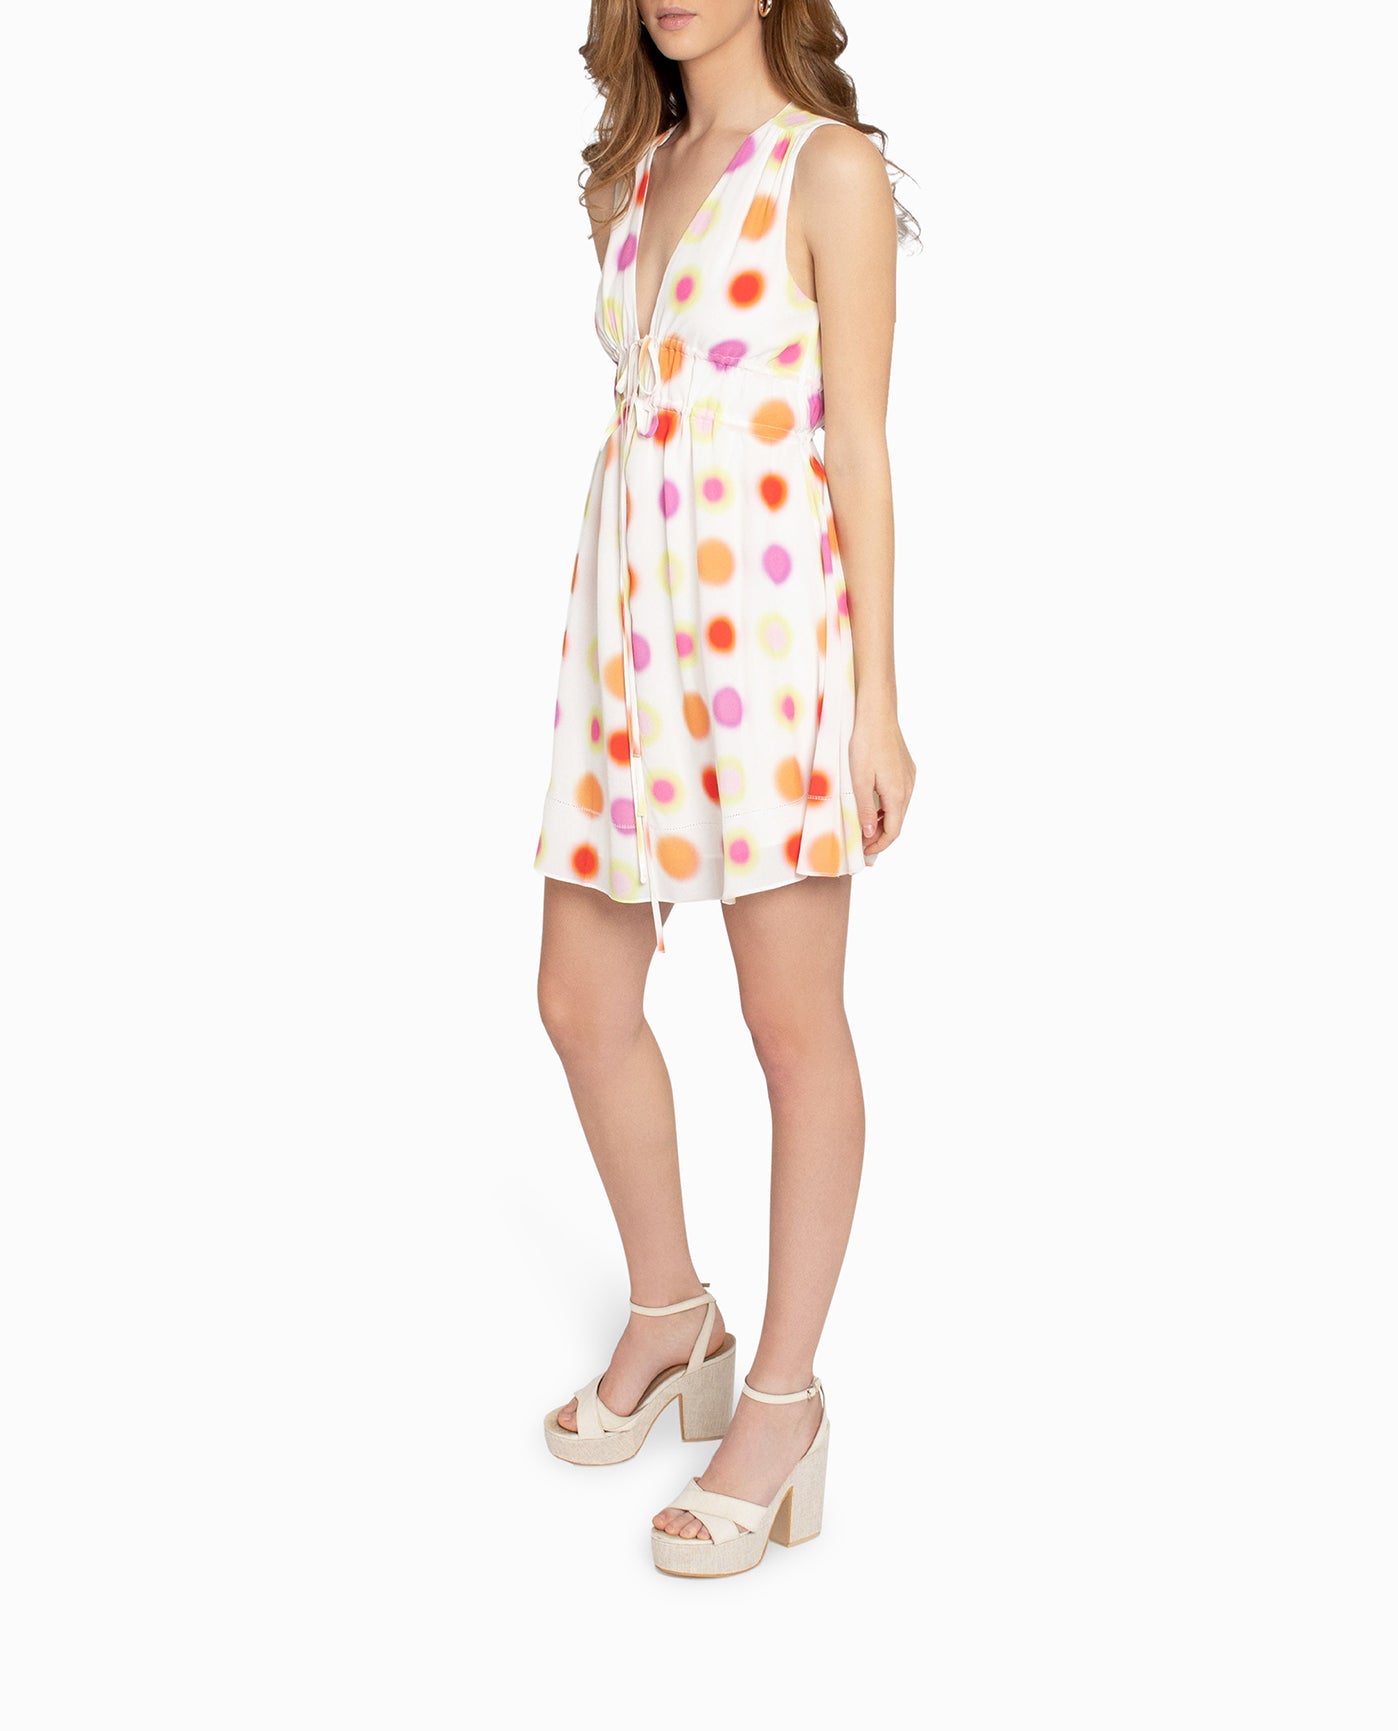 SIDE OF RADIANT AURA SILK MINI DRESS WITH TIE FRONT | WHITE AURA DOT